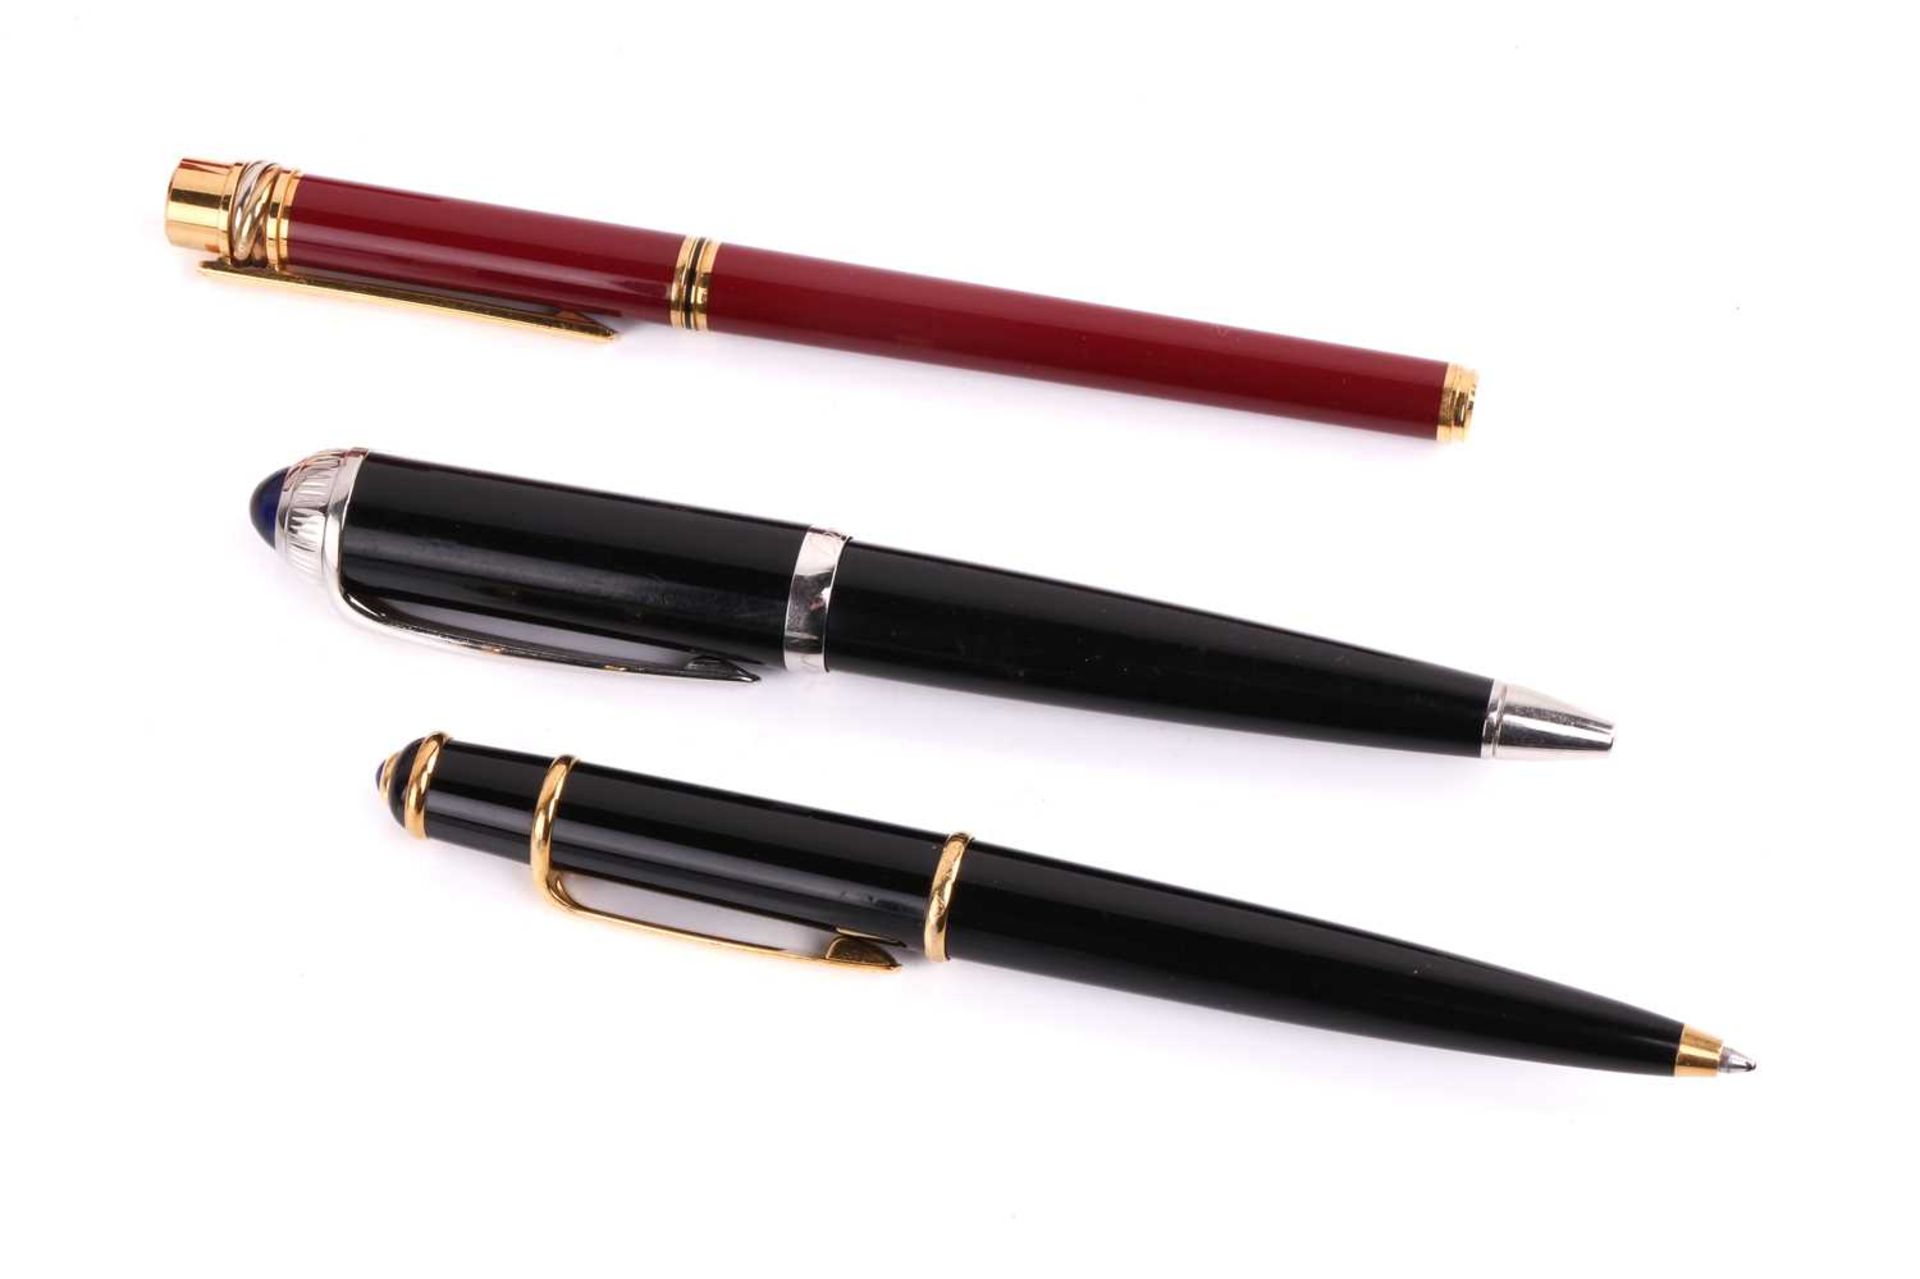 Must de Cartier - A 'Saphir' fountain pen, boxed together with a Cartier ballpoint pen and another - Image 2 of 8